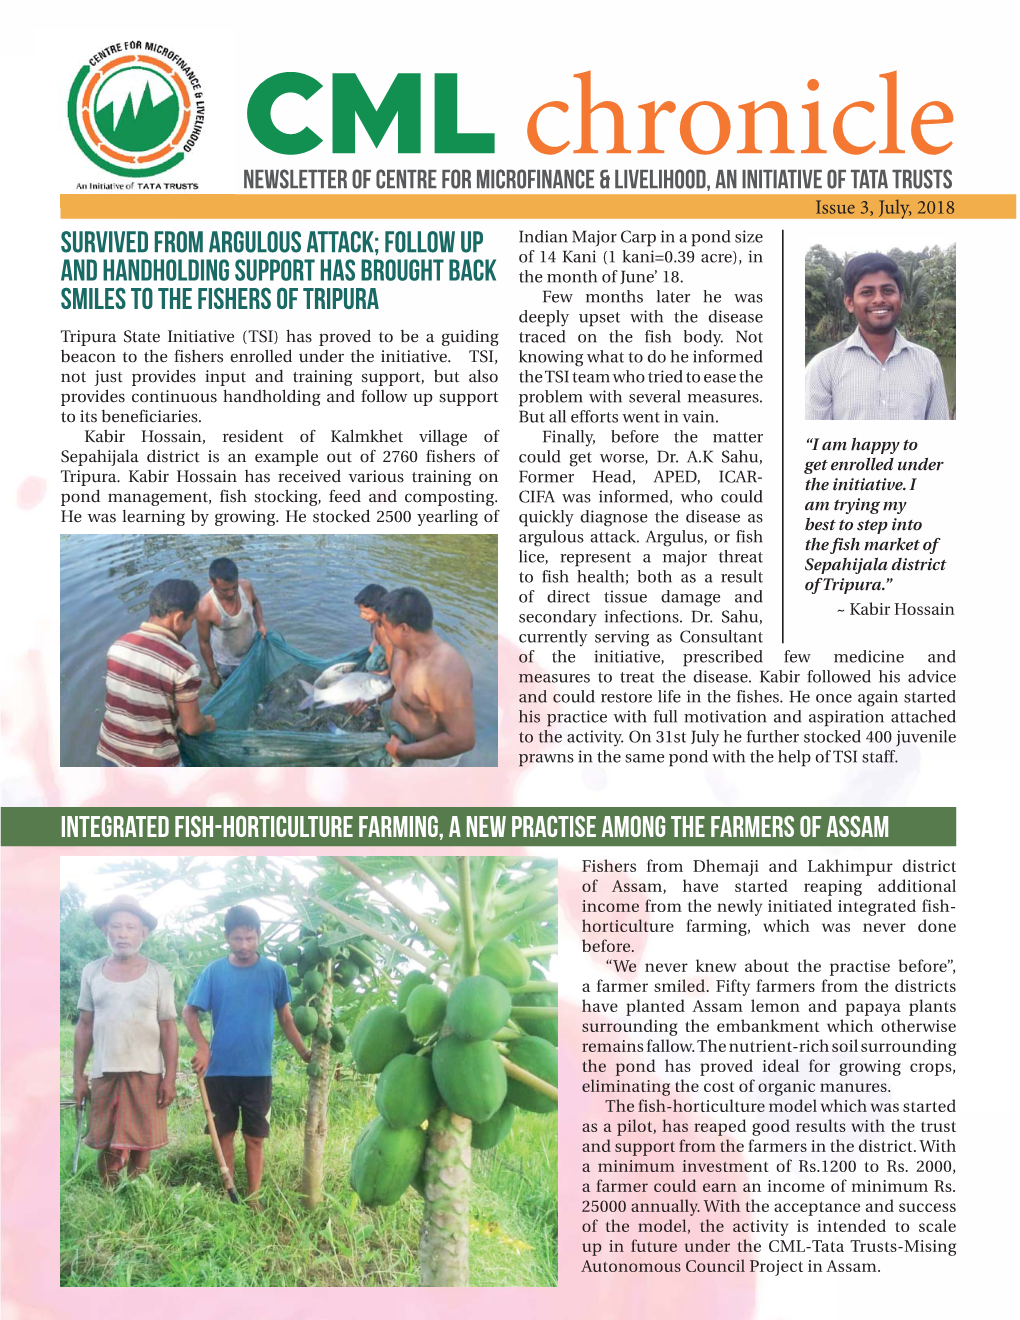 Integrated Fish-Horticulture Farming, a New Practise Among the Farmers of Assam